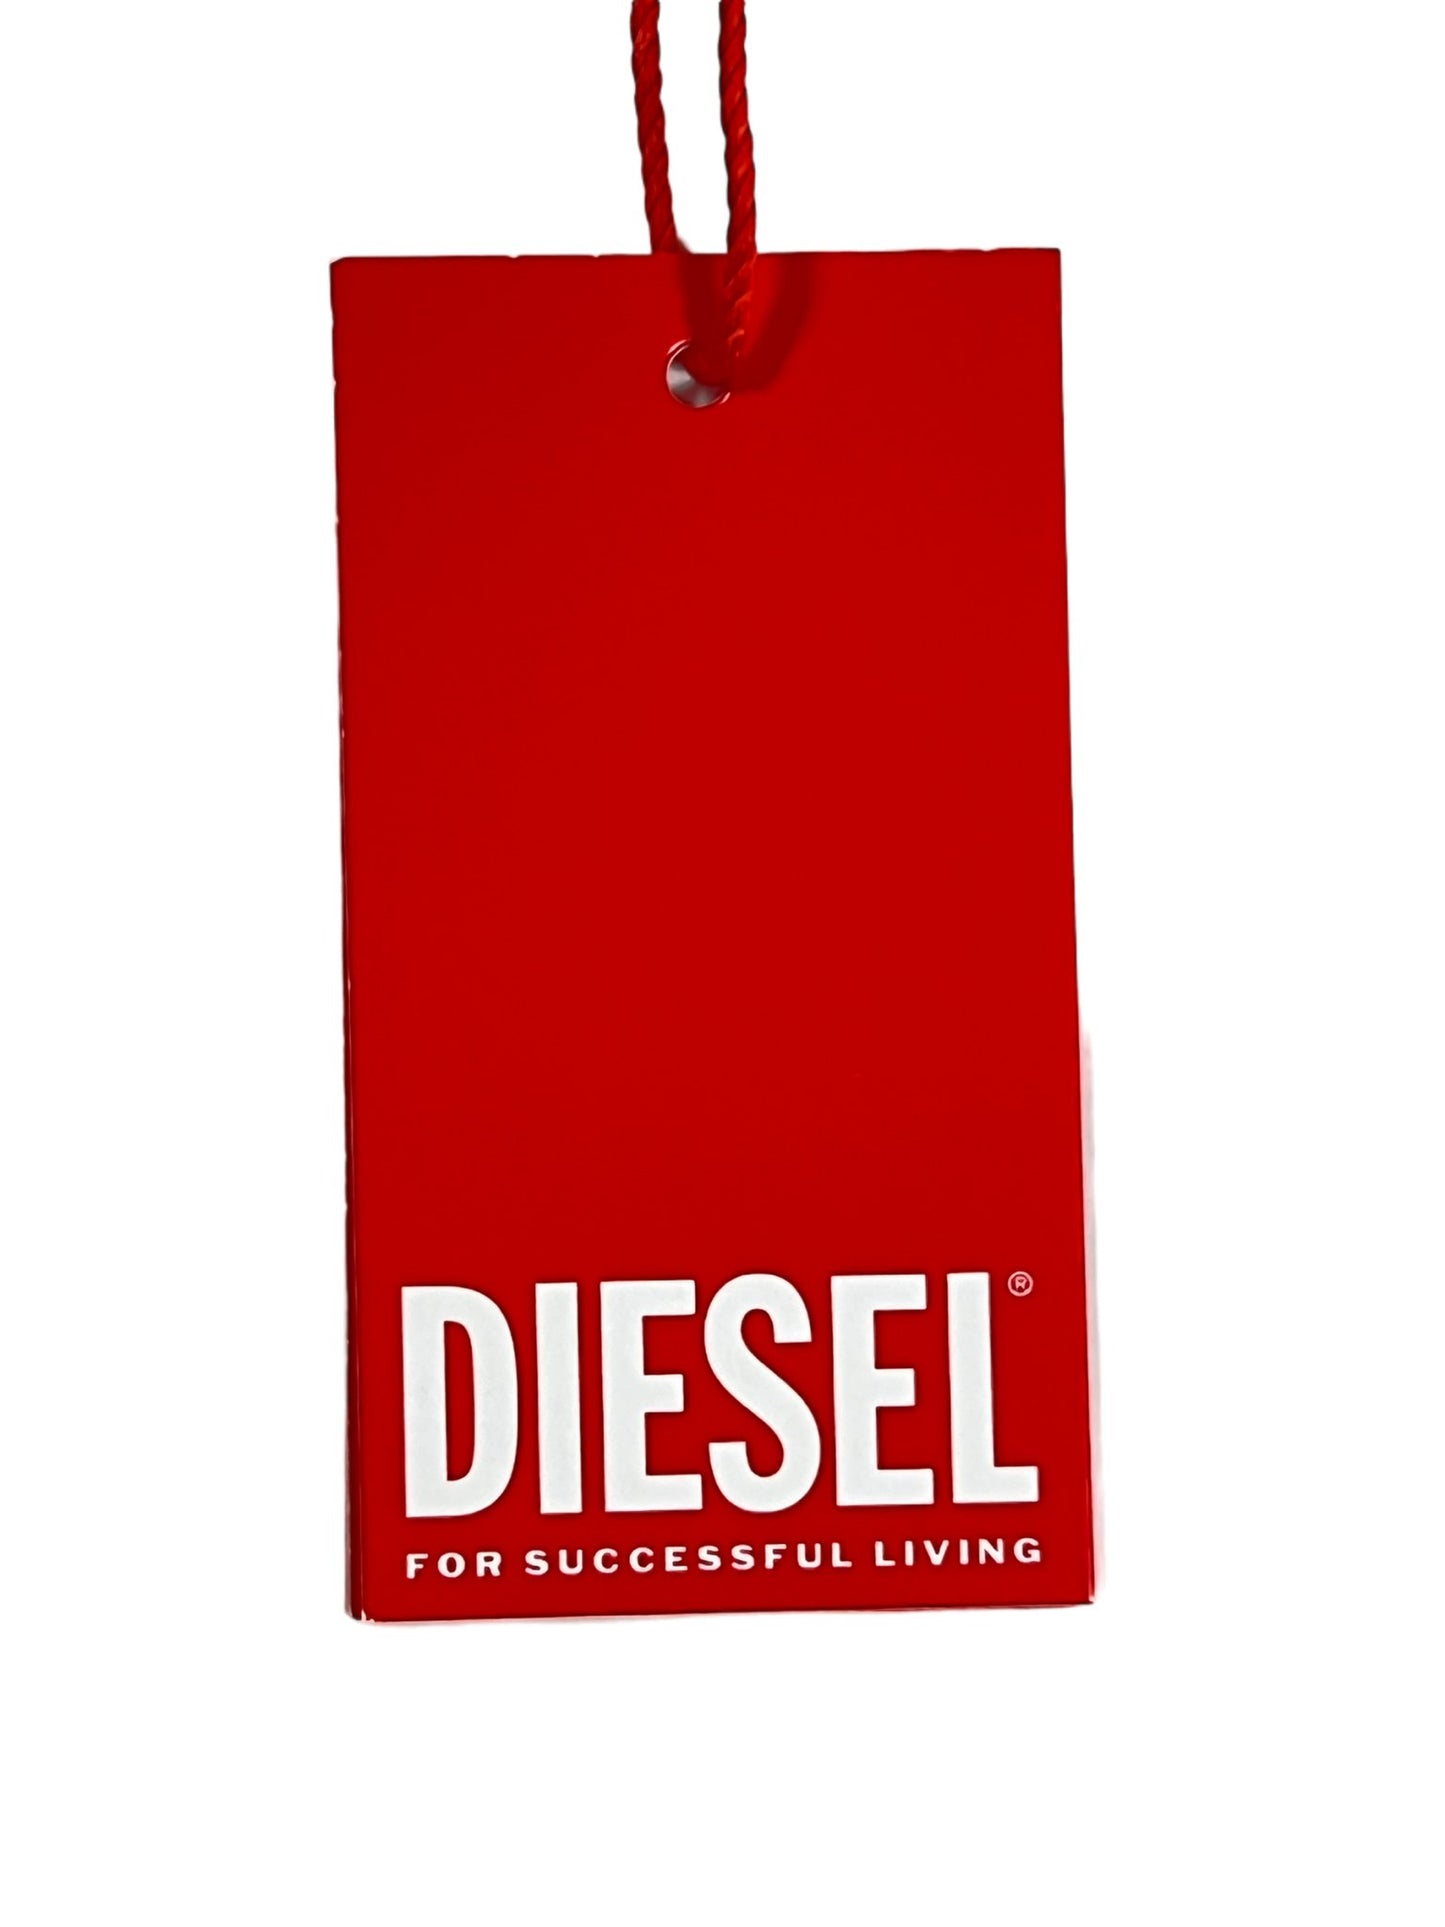 A red DIESEL brand tag with white text, hanging by a red string, against a white background, for men's board shorts.